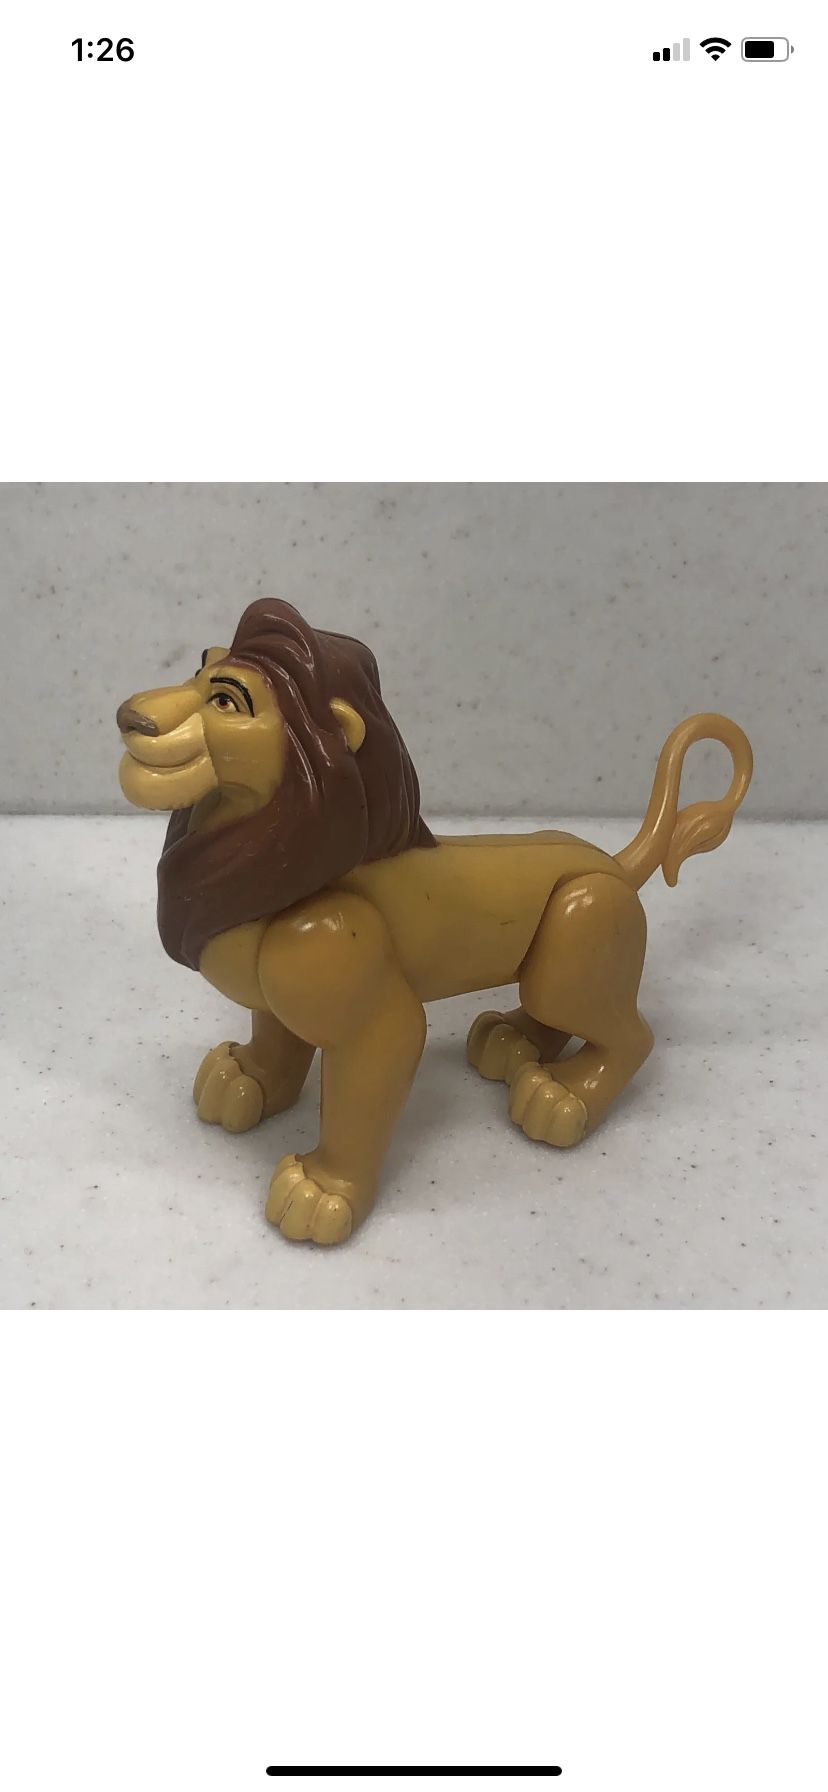 Vintage Disney The Lion King MUFASA Action Figure Toy 1994 Burger King